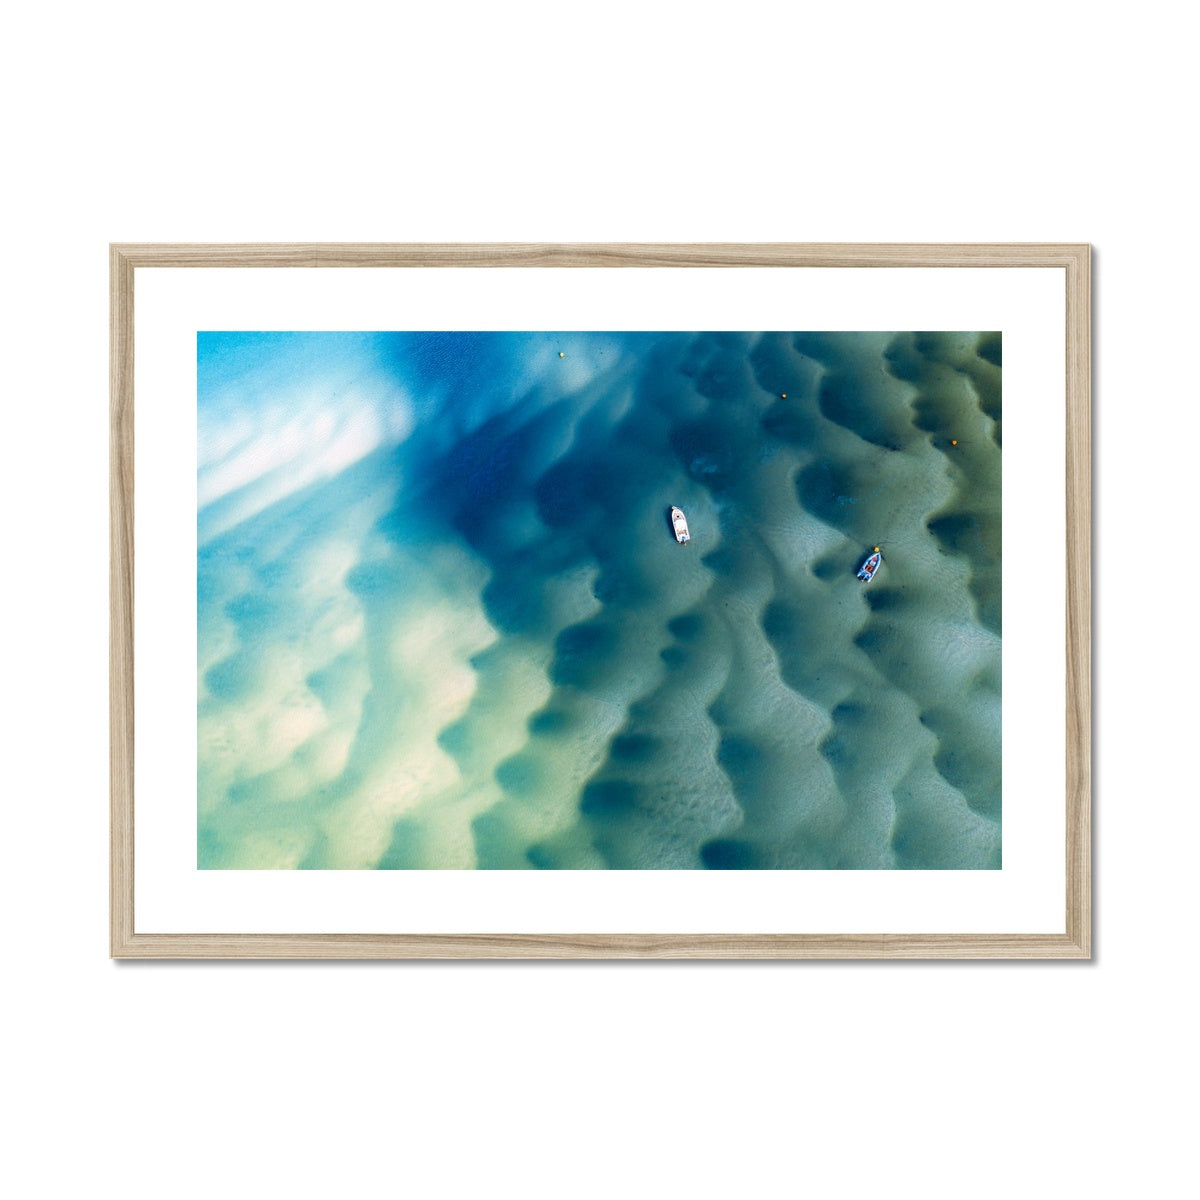 padstow ripples wooden frame